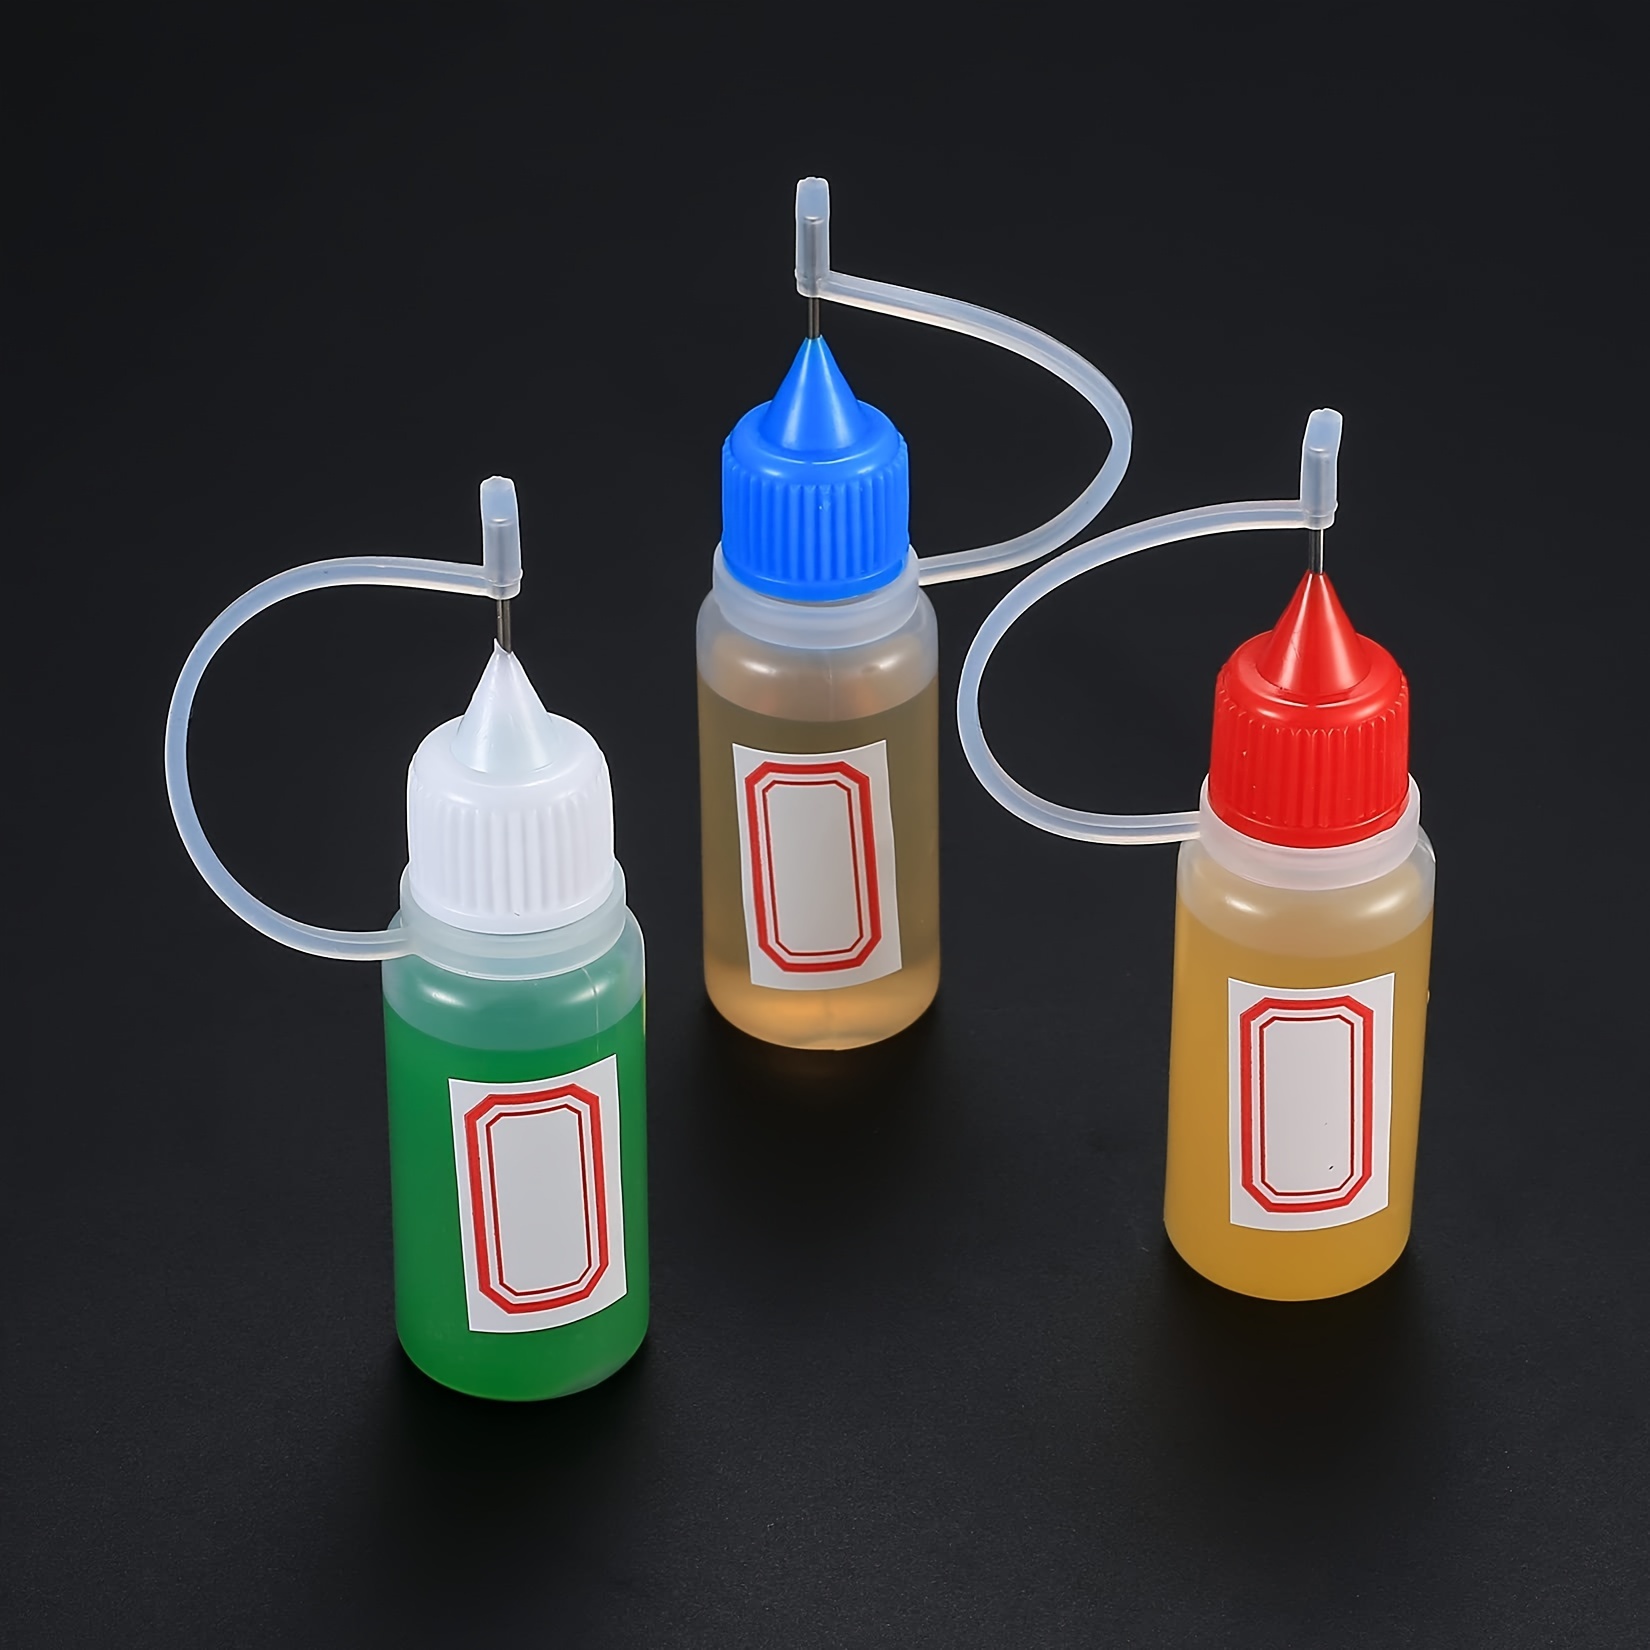 Quilling tool & glue bottle